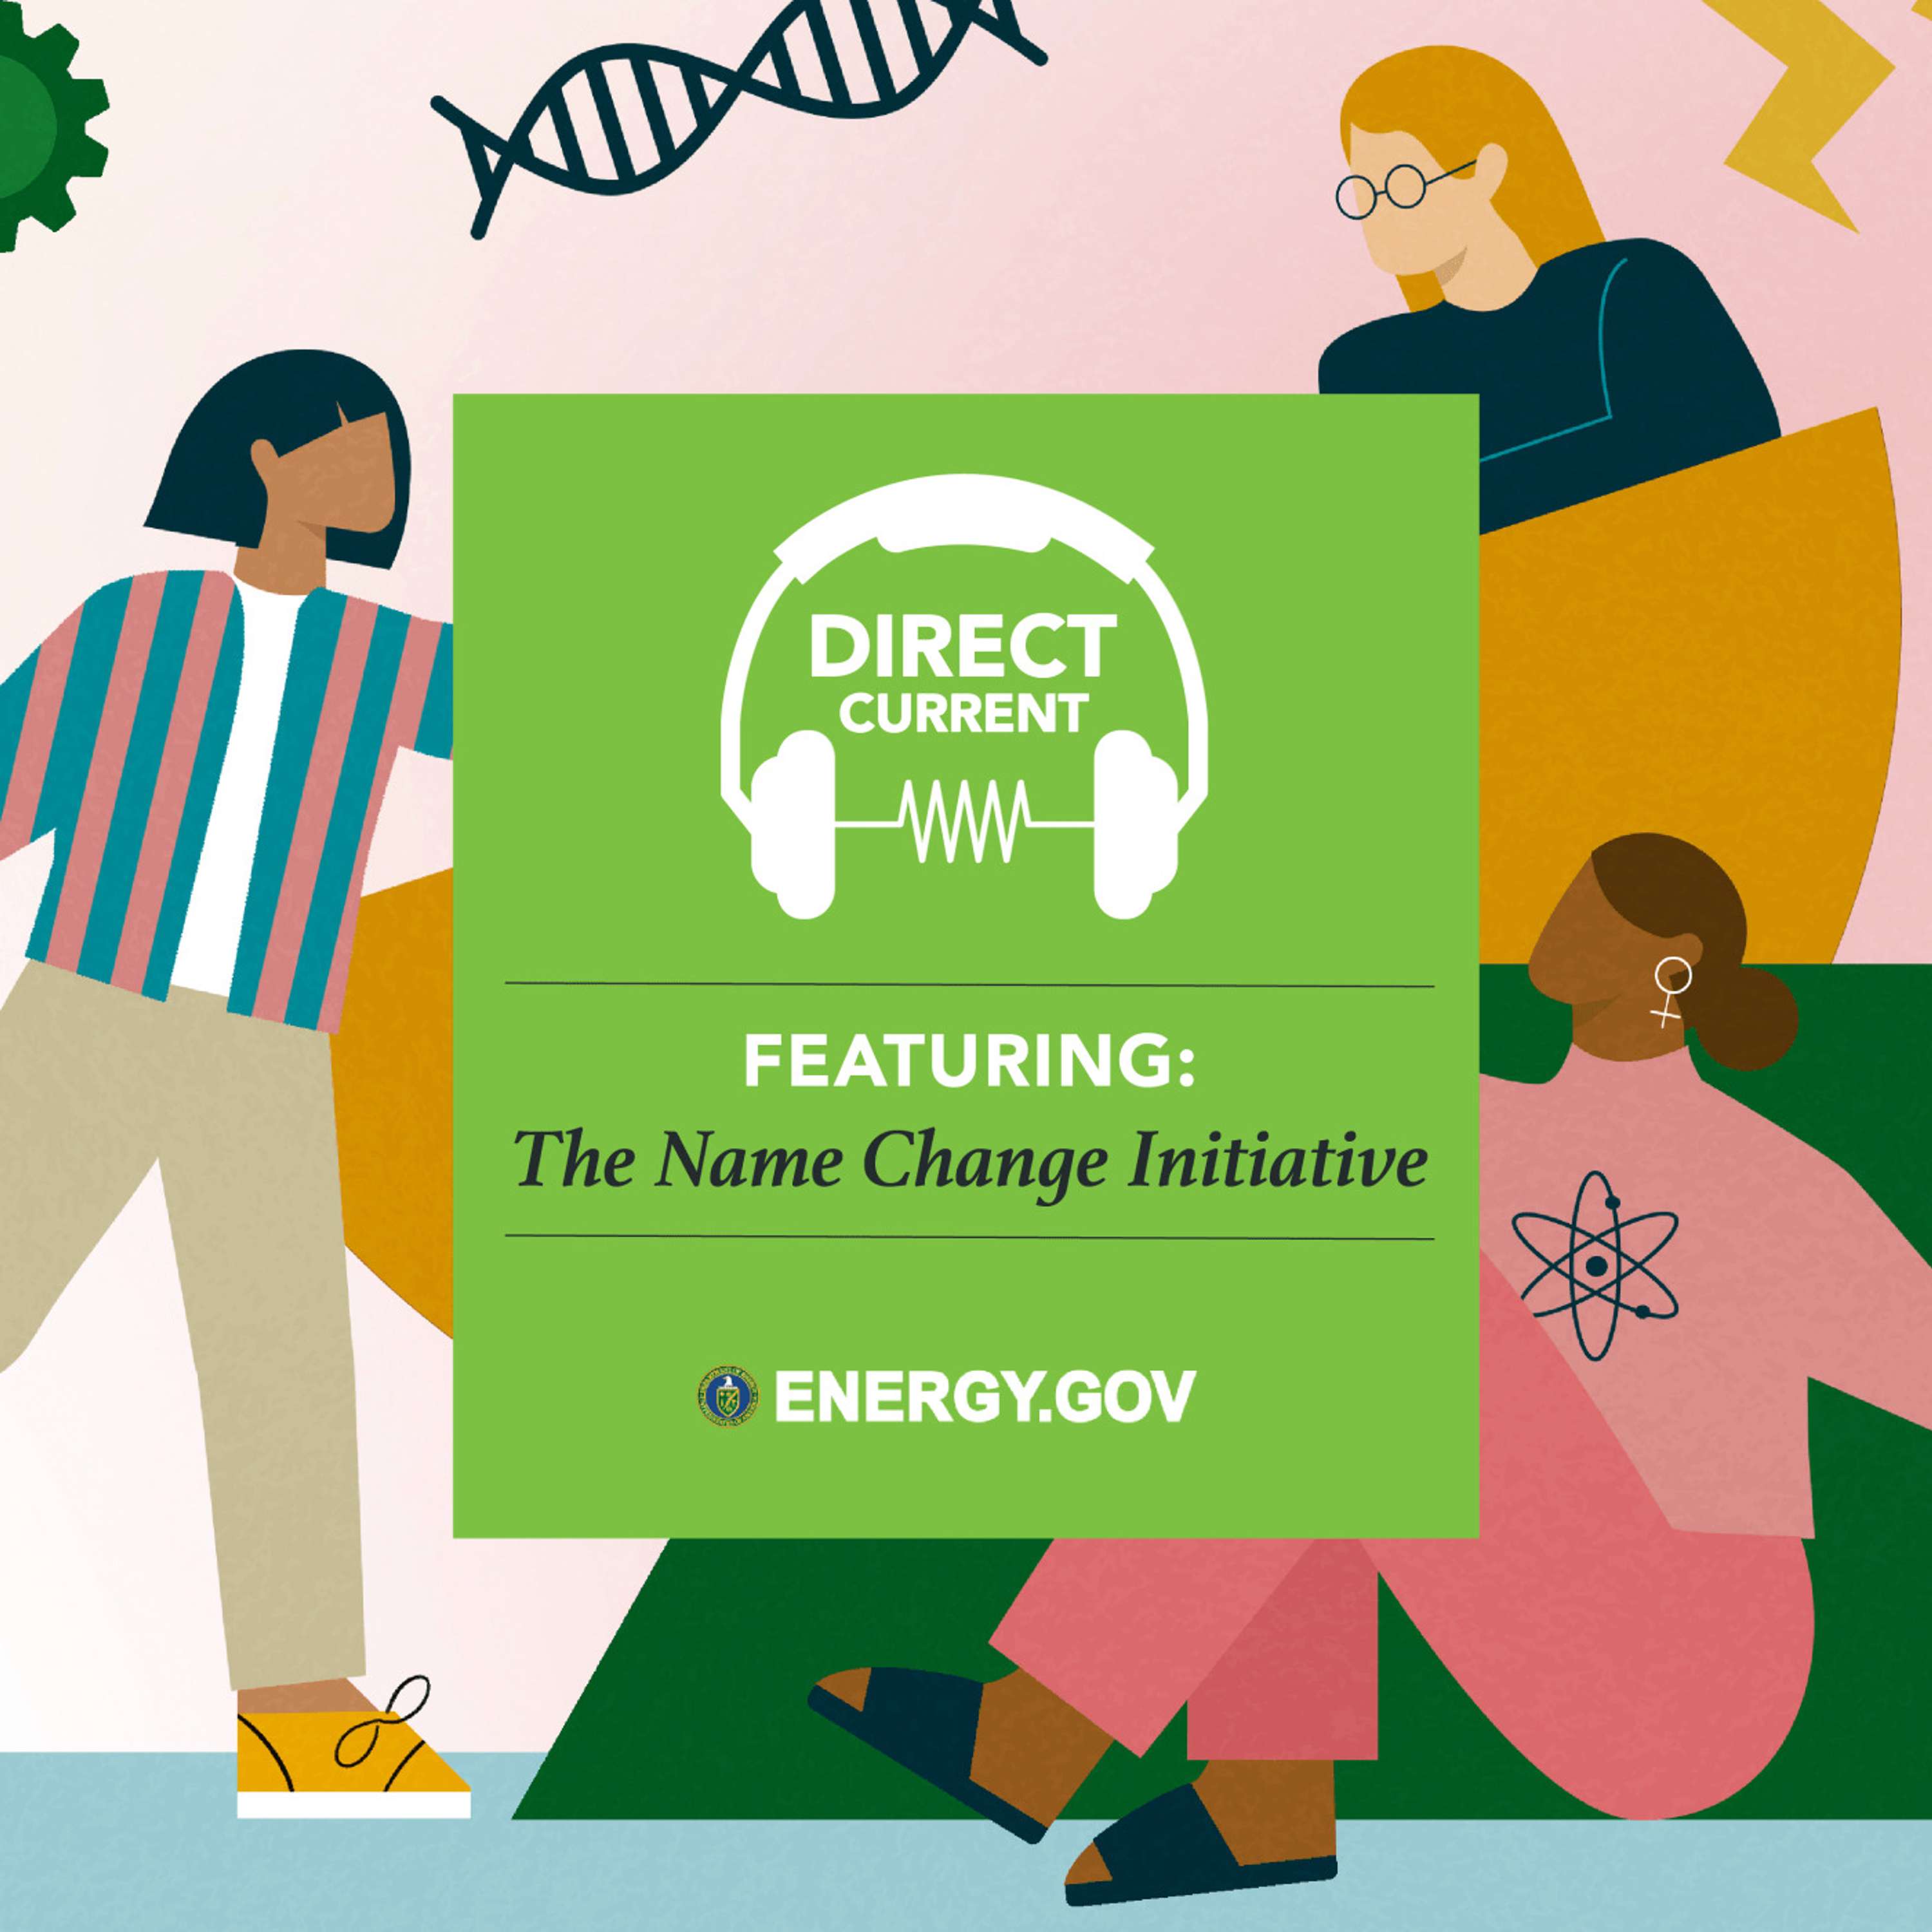 SPECIAL FEATURE: The Name Change Initiative